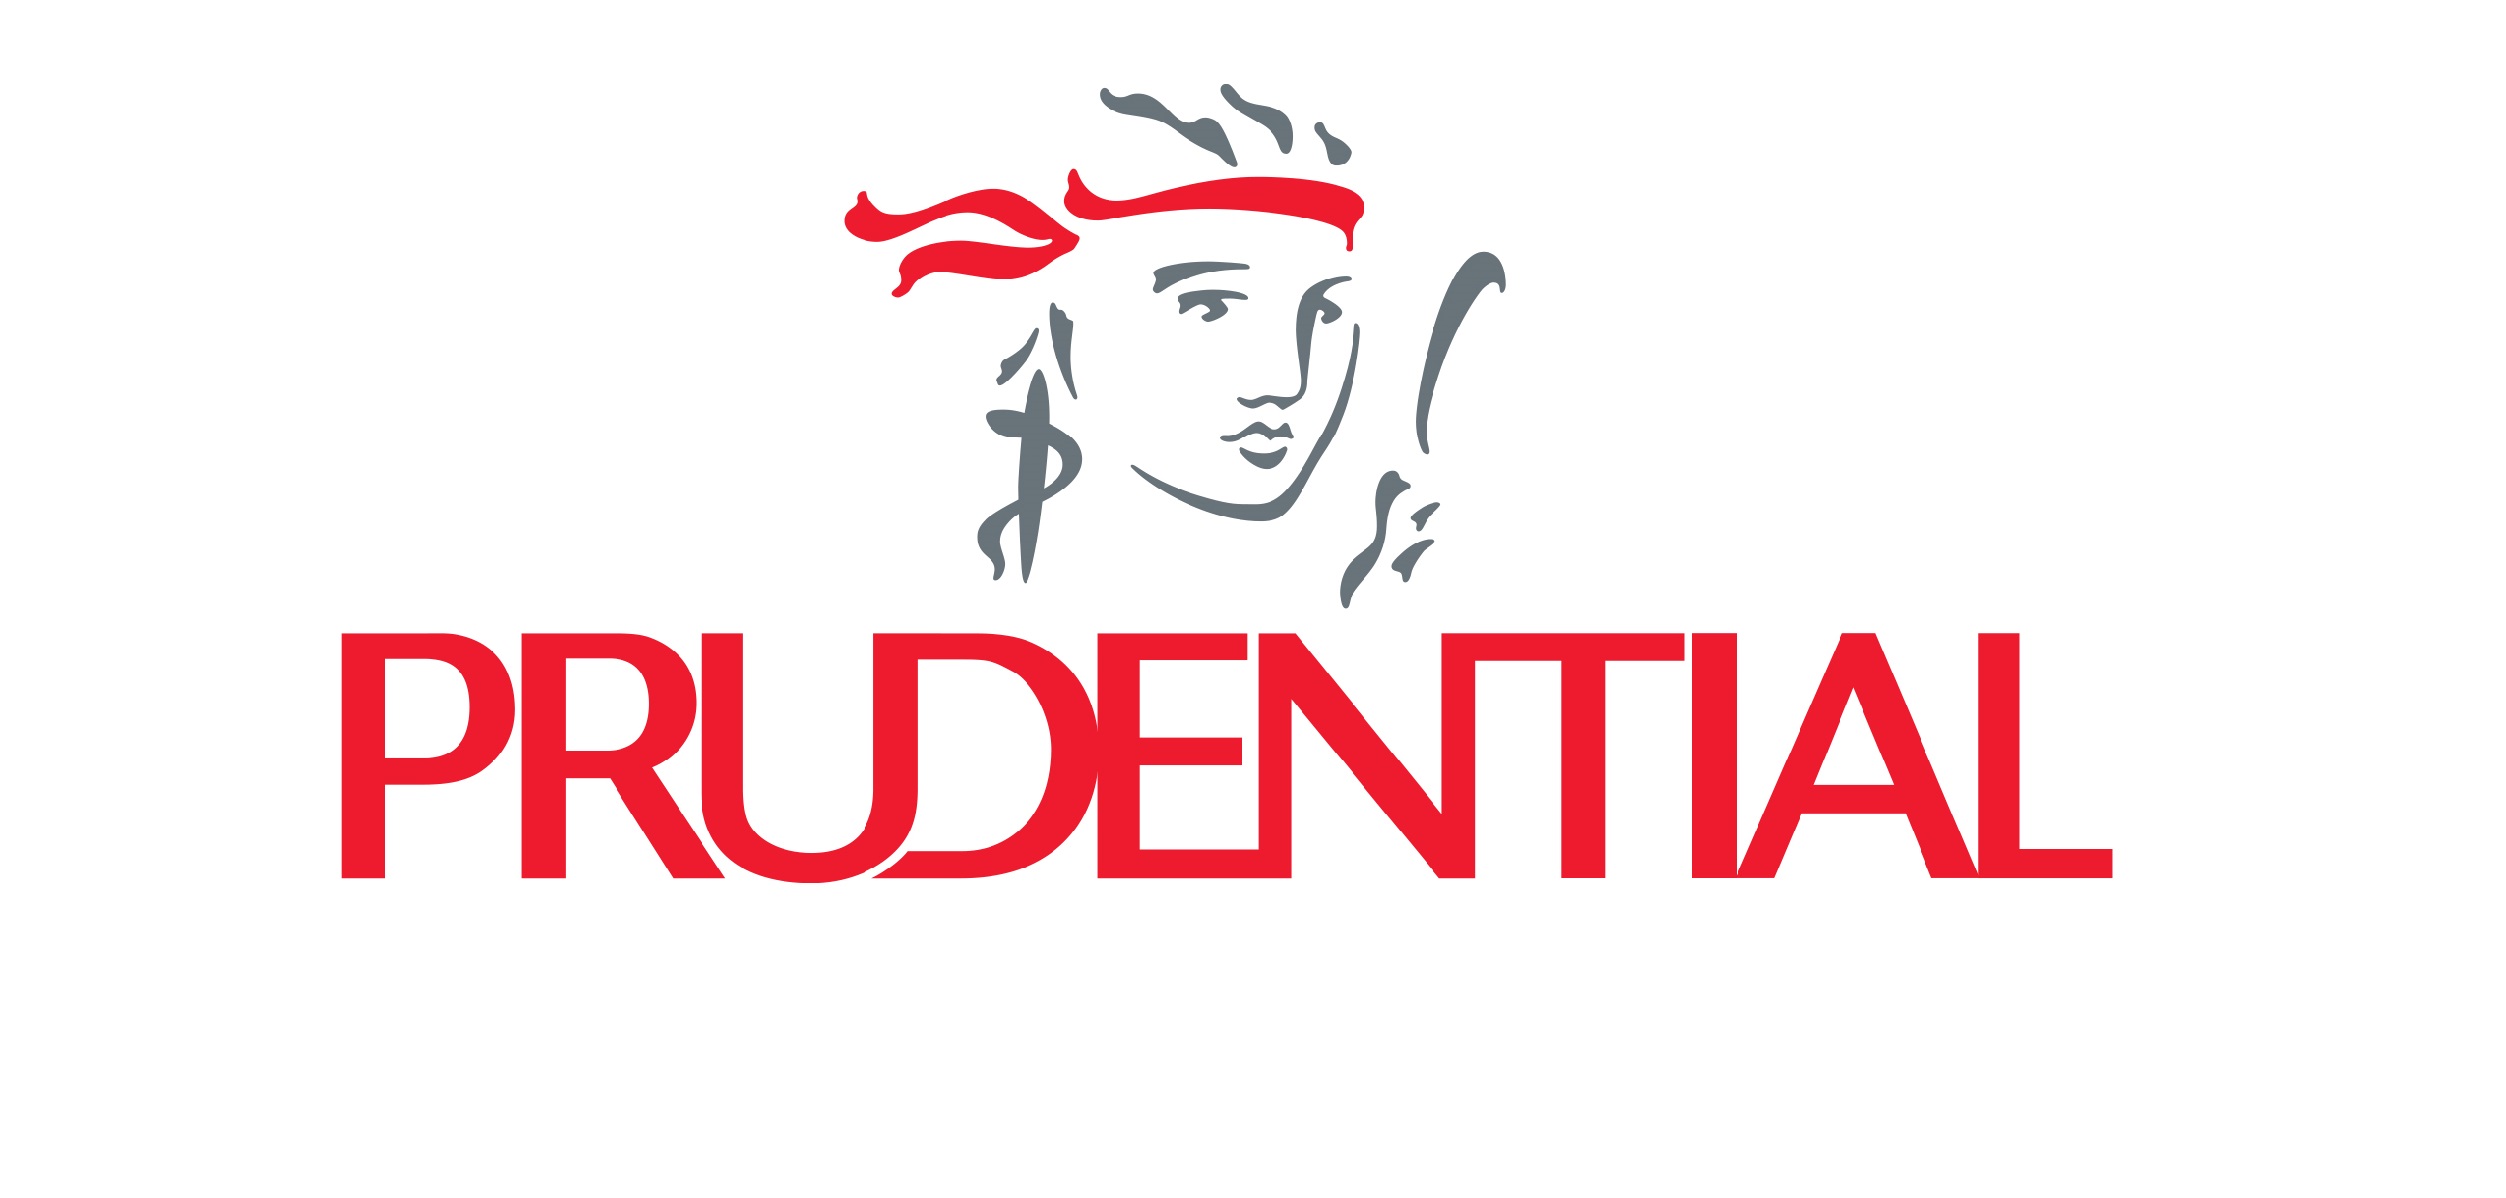 Prudential Việt Nam Tuyển Dụng Thực Tập Sinh Actuarial (Capital & Actuarial Solutions ) Full-time